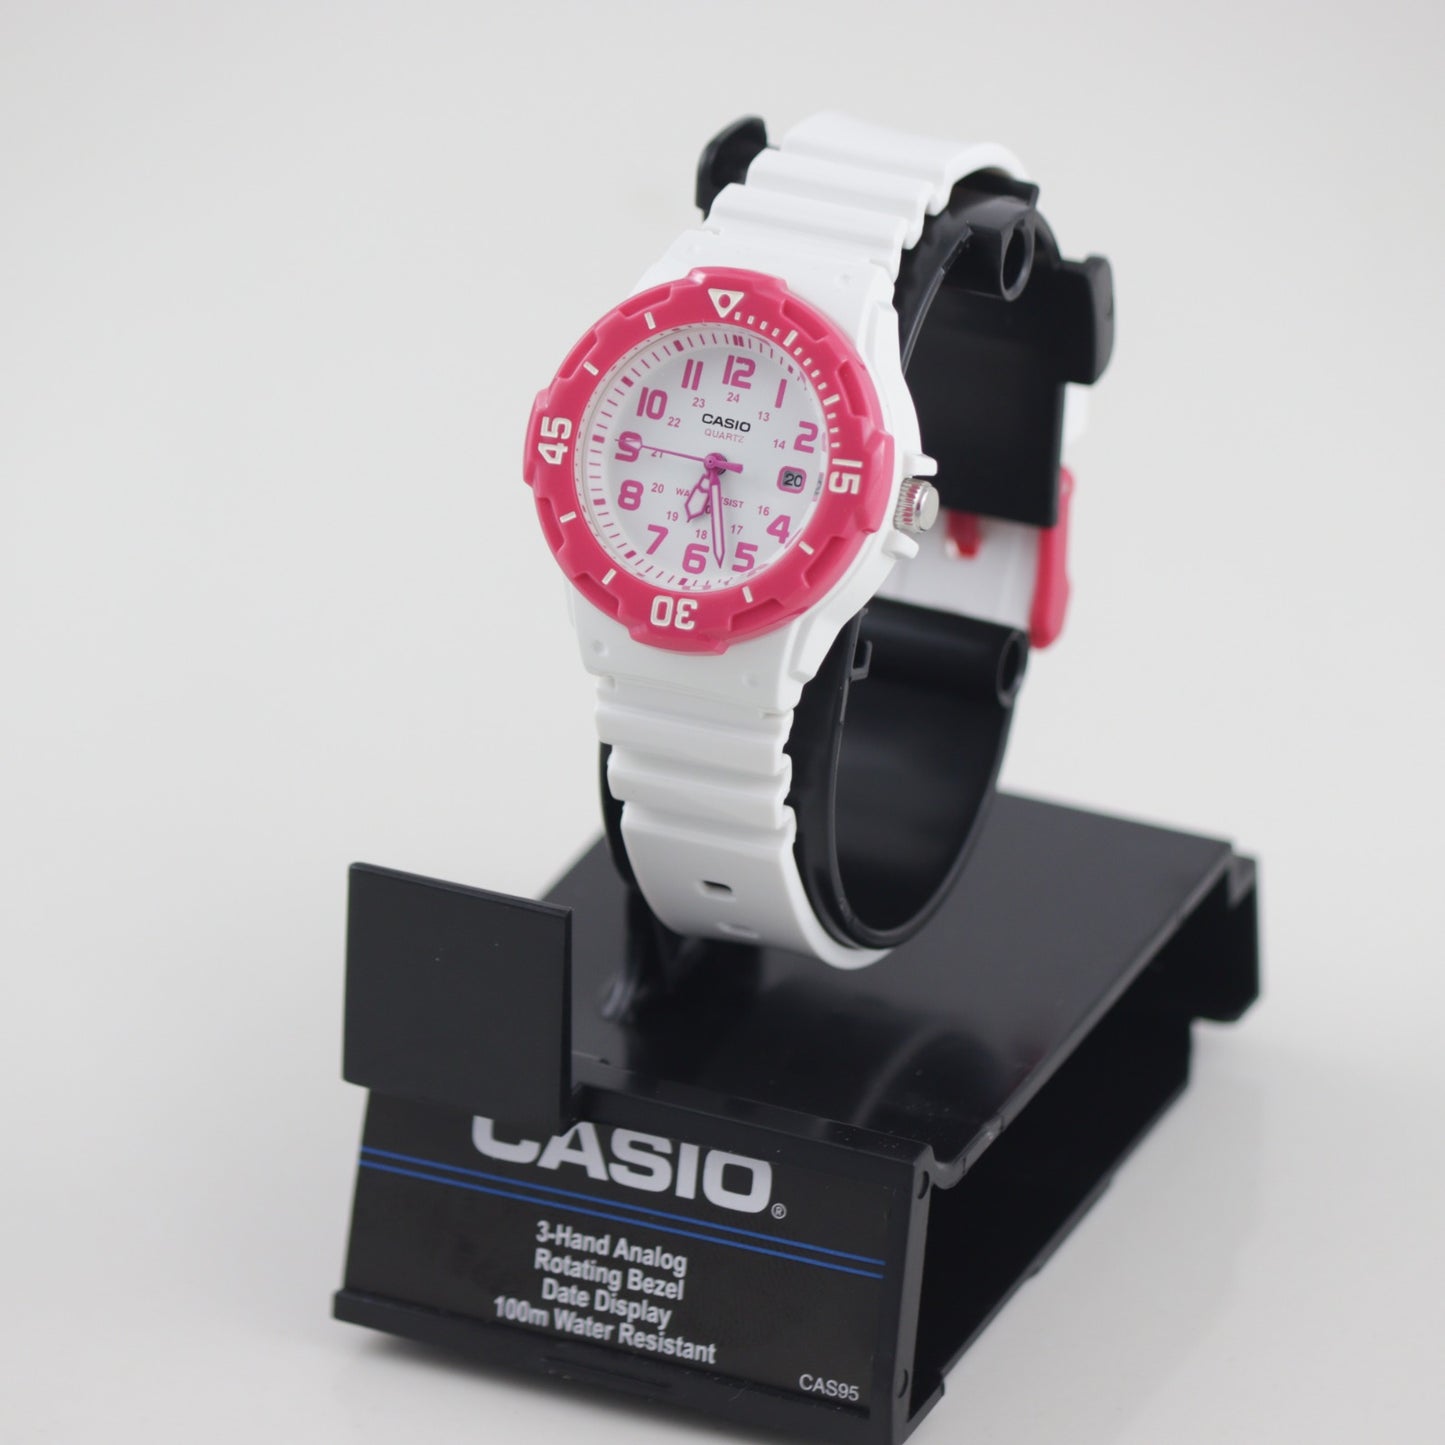 Casio Women's Dive Style Watch, White/Pink Accents